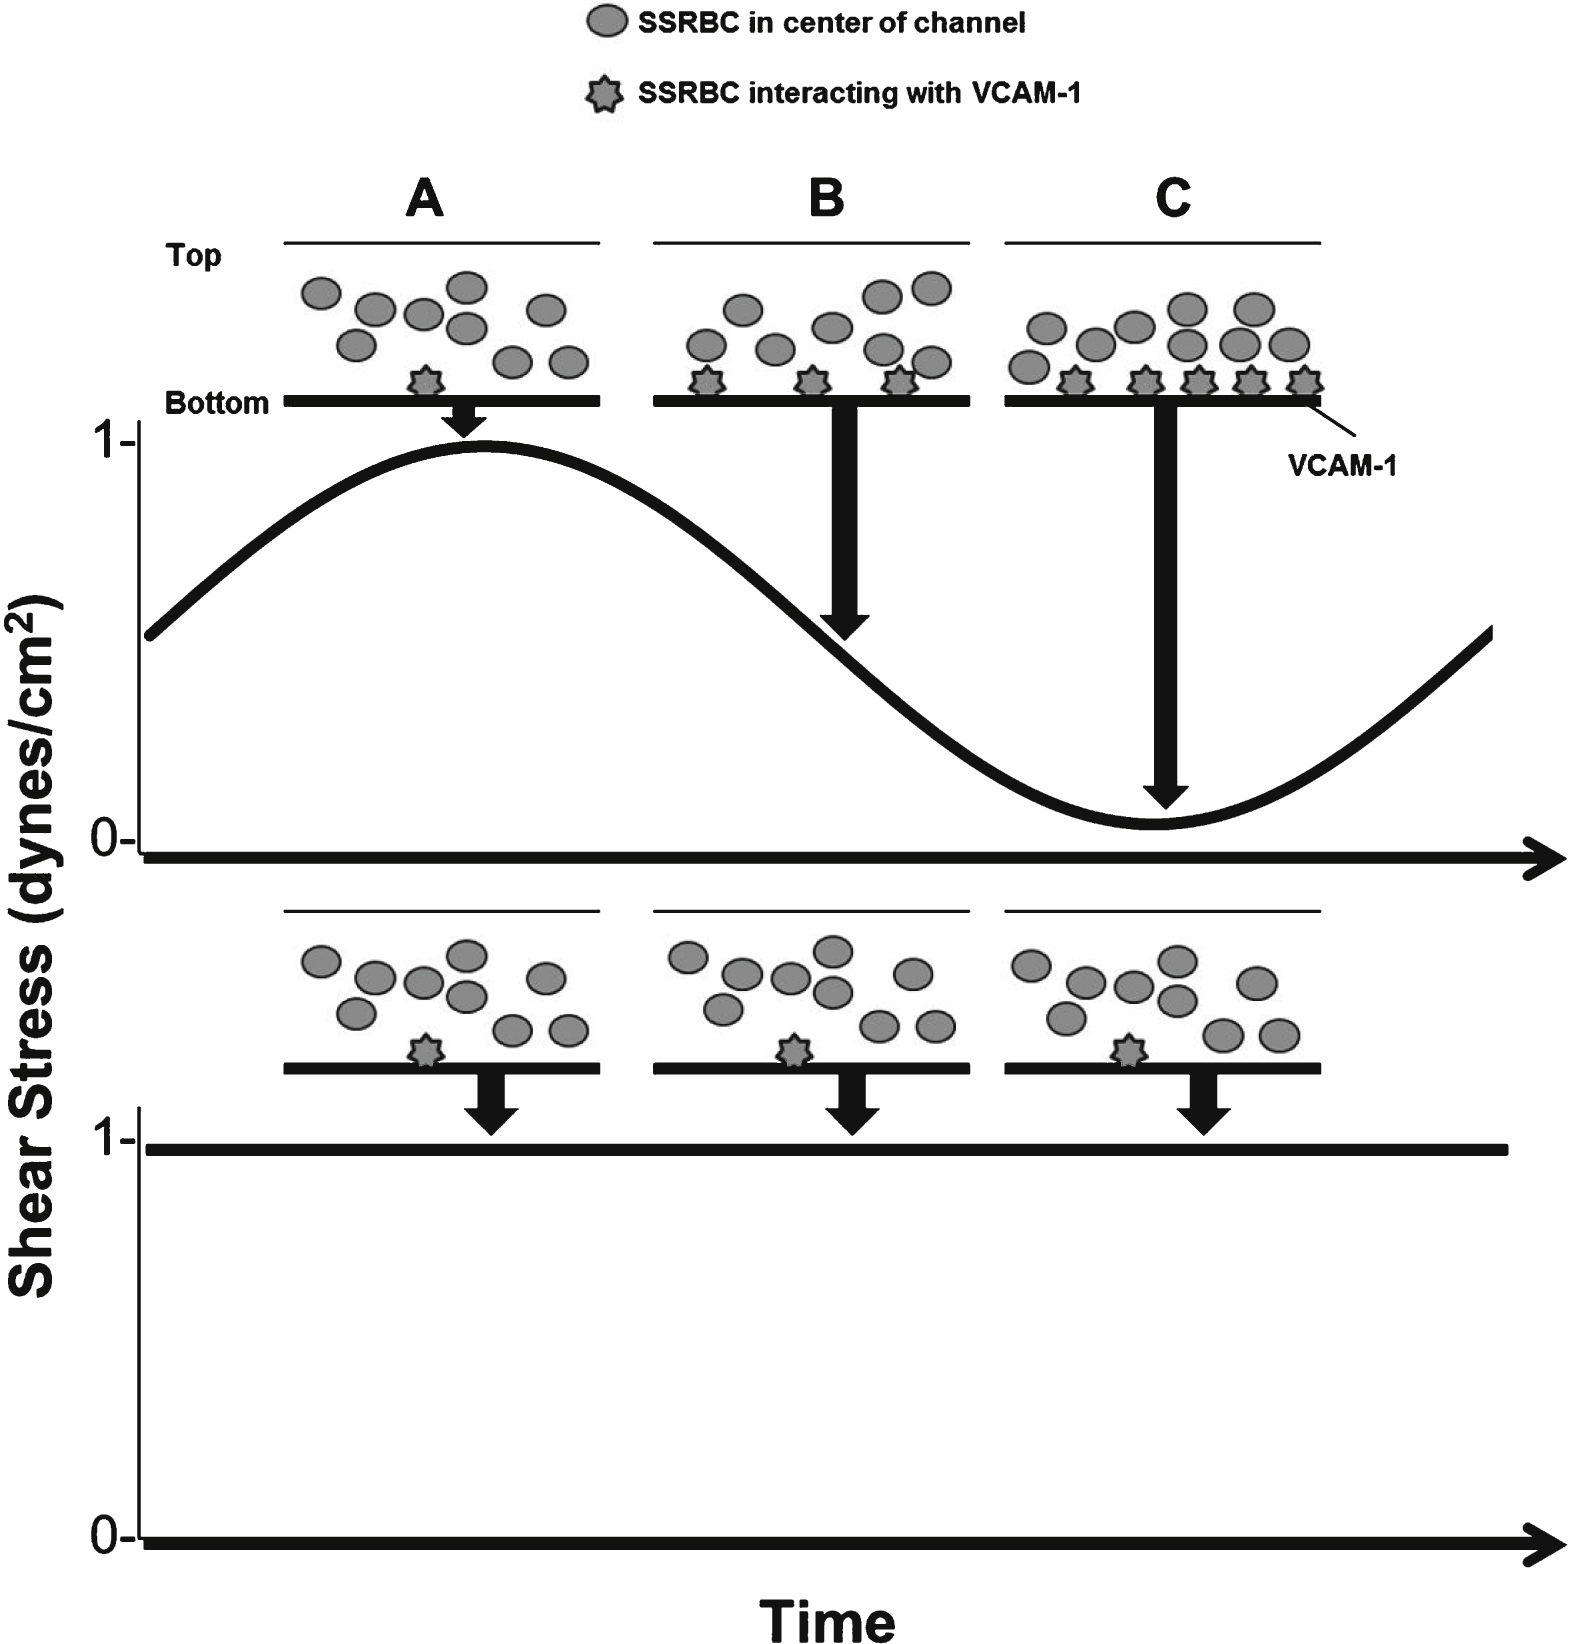 Low shear amplitude during pulsatile flow promotes adhesive interactions between SSRBCs and VCAM-1. A) Blood flow streamlines at the center of the channel during continuous flow and high amplitude blood flow. B) Transitions occurring between high and low shear amplitudes allow blood flow to settle on the bottom surface, thus favoring SSRBC and VCAM-1 interactions. C) At low shear amplitude, blood flow is stalled and blood settles at the bottom surface of the channel. Low flow periods support VLA-4/VCAM-1 interactions. We propose that increased adhesion during pulsatile flow occurs under these conditions.